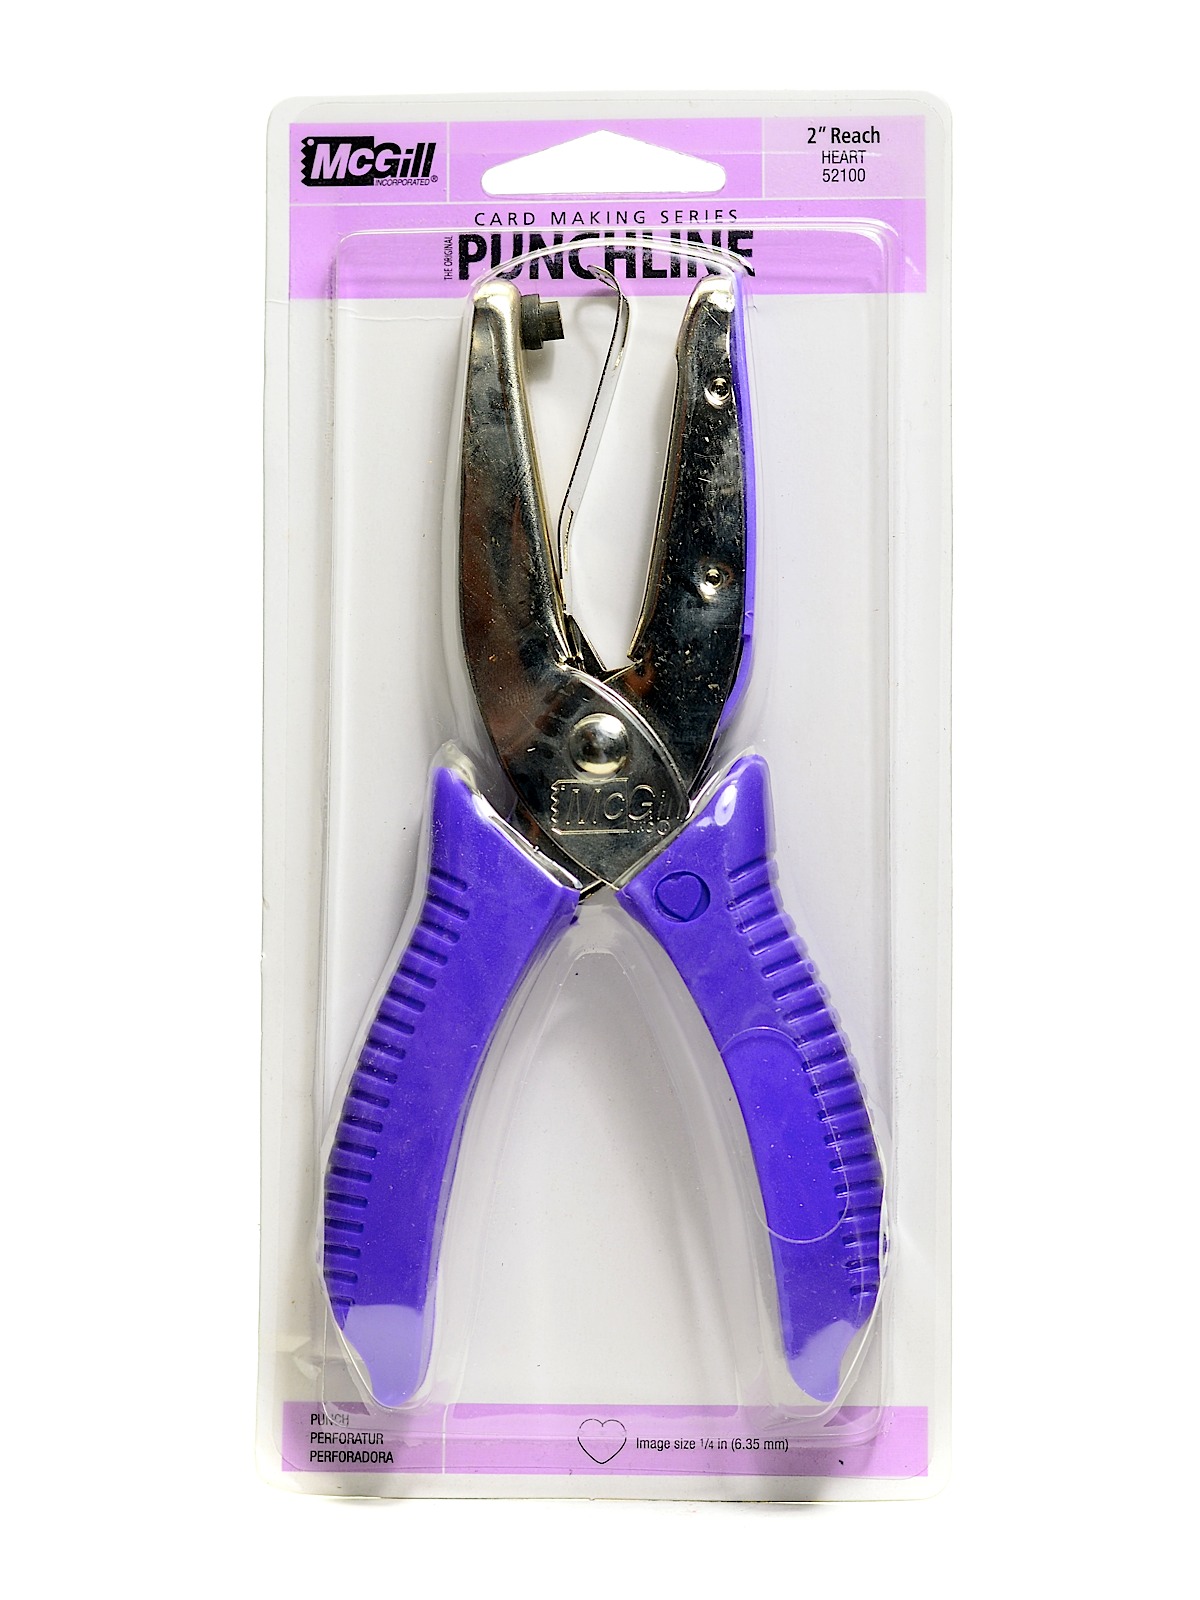 Punchline Hand-held Punches Heart 1 4 In. 2 In. Reach